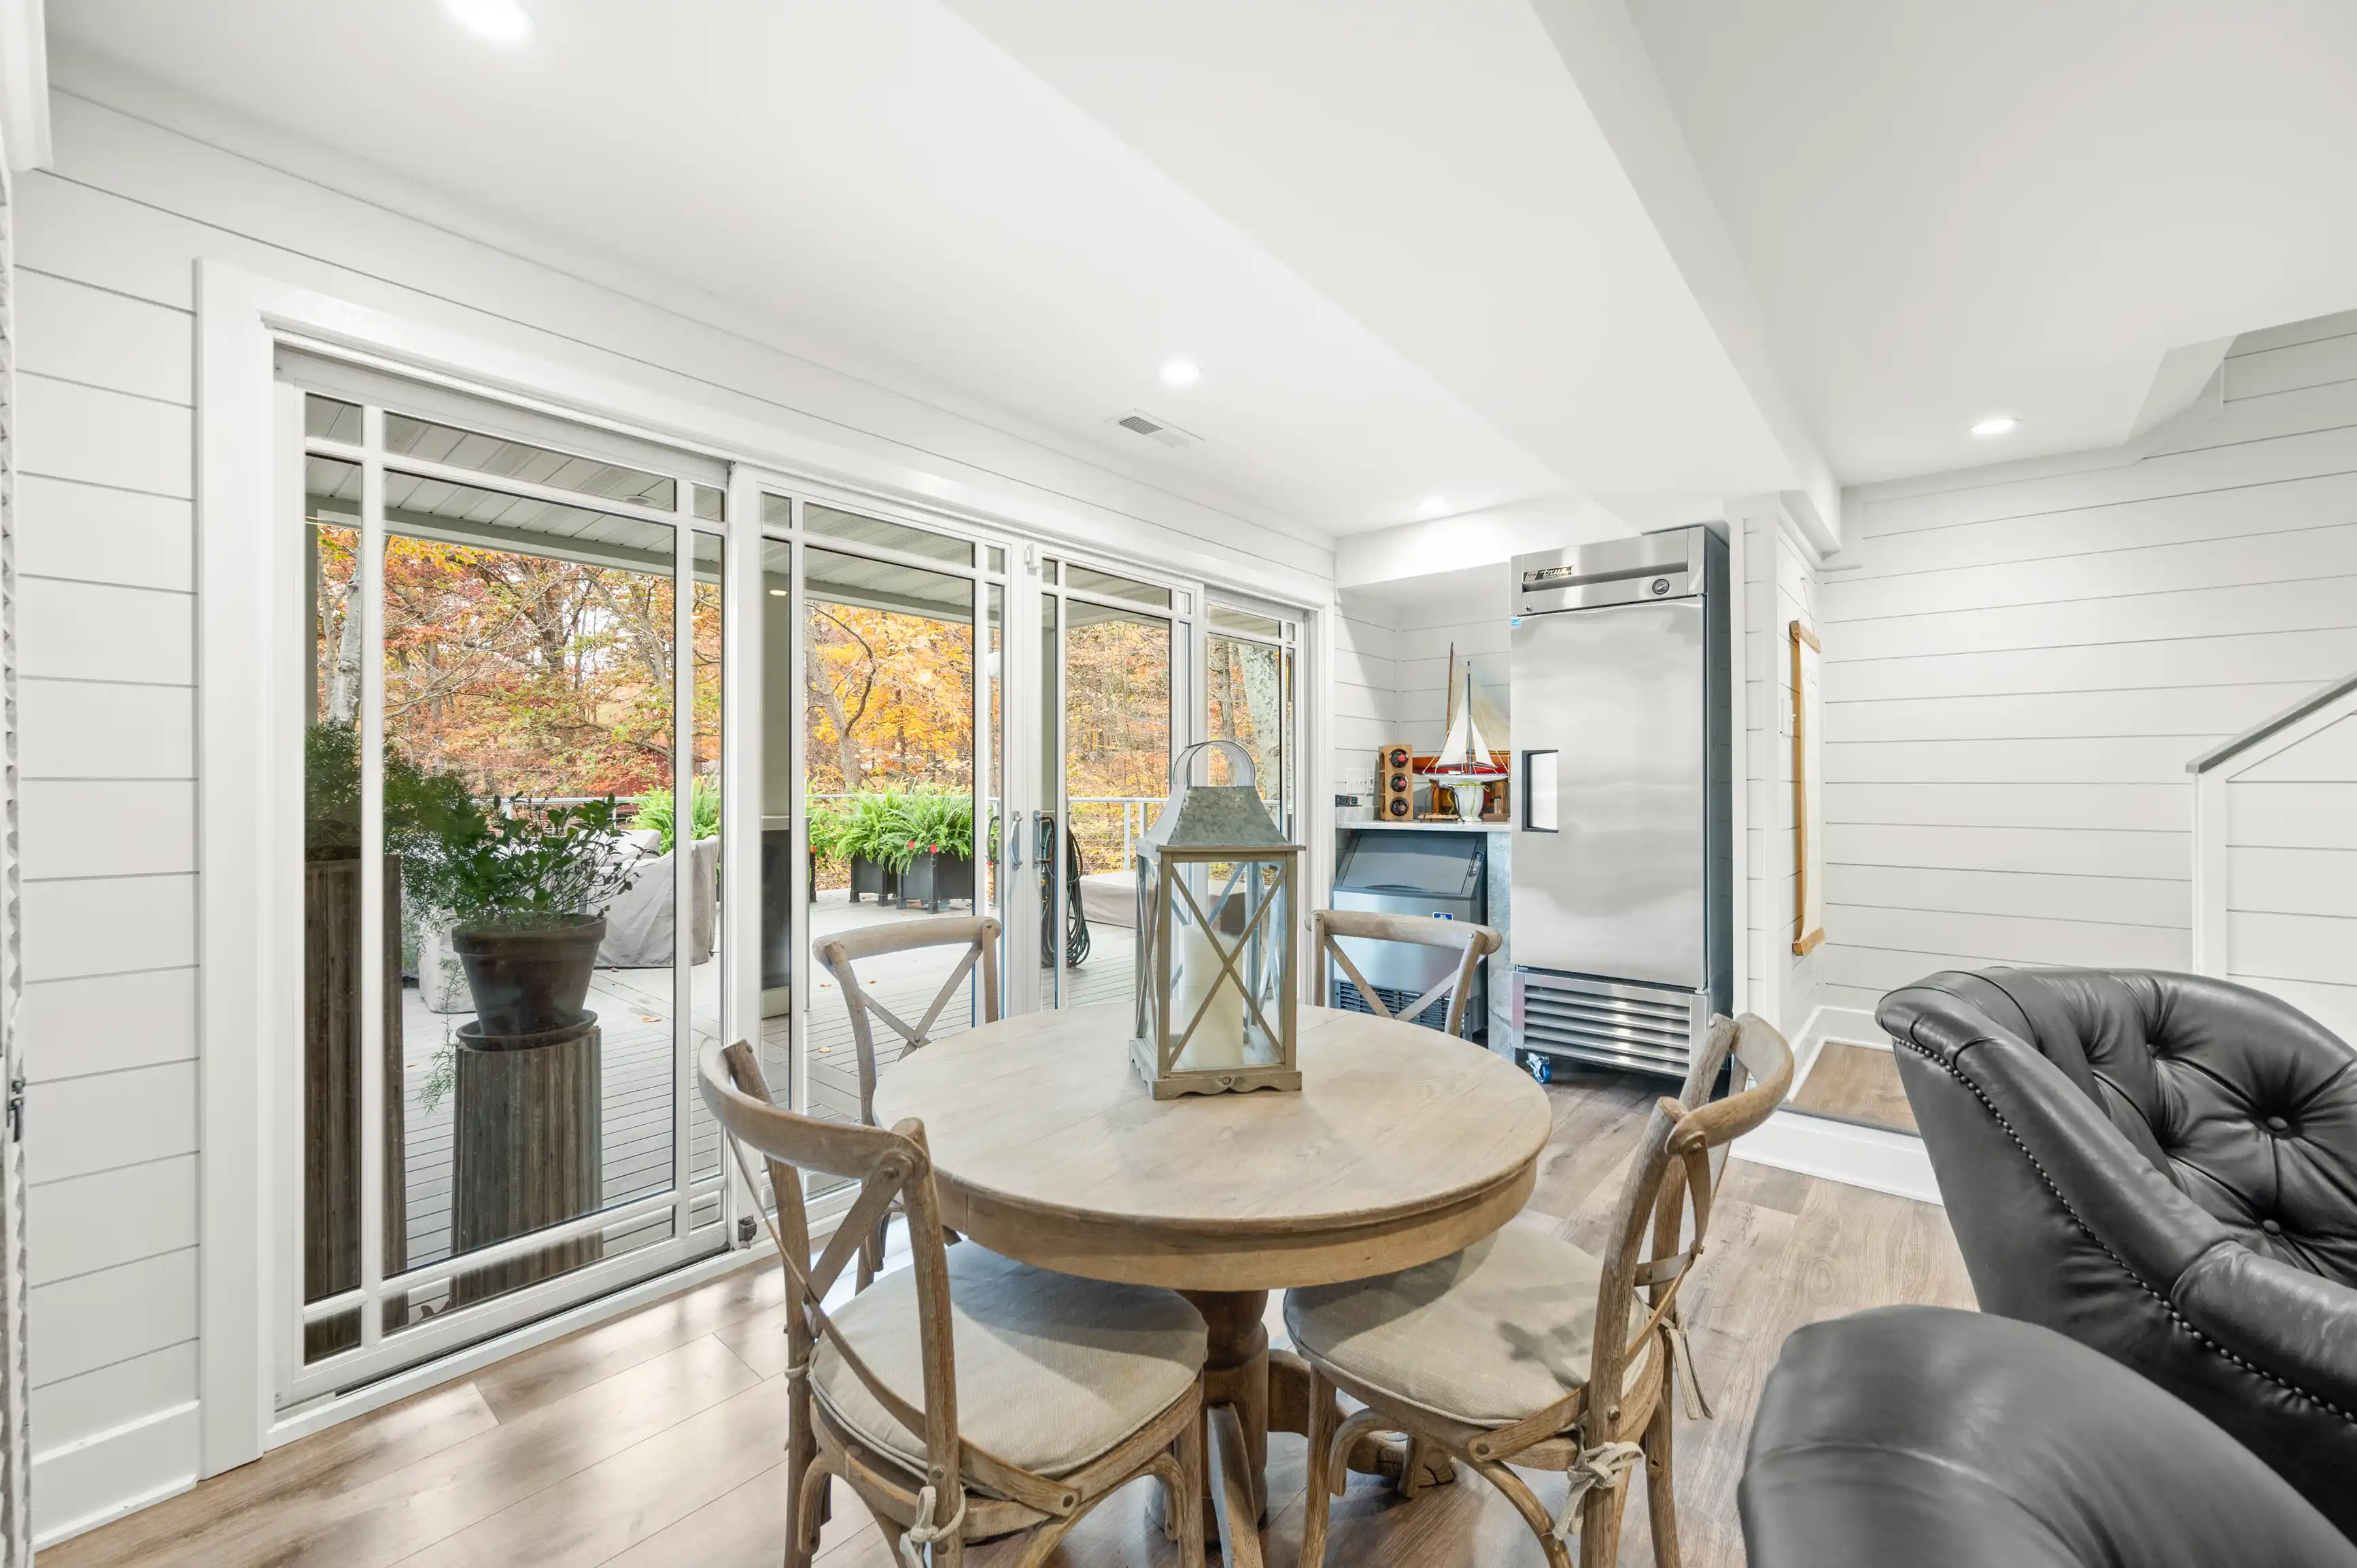 Bright, modern sunroom with sliding glass doors leading to a deck with autumn foliage, featuring a round wooden table, chairs, and a black leather sofa.